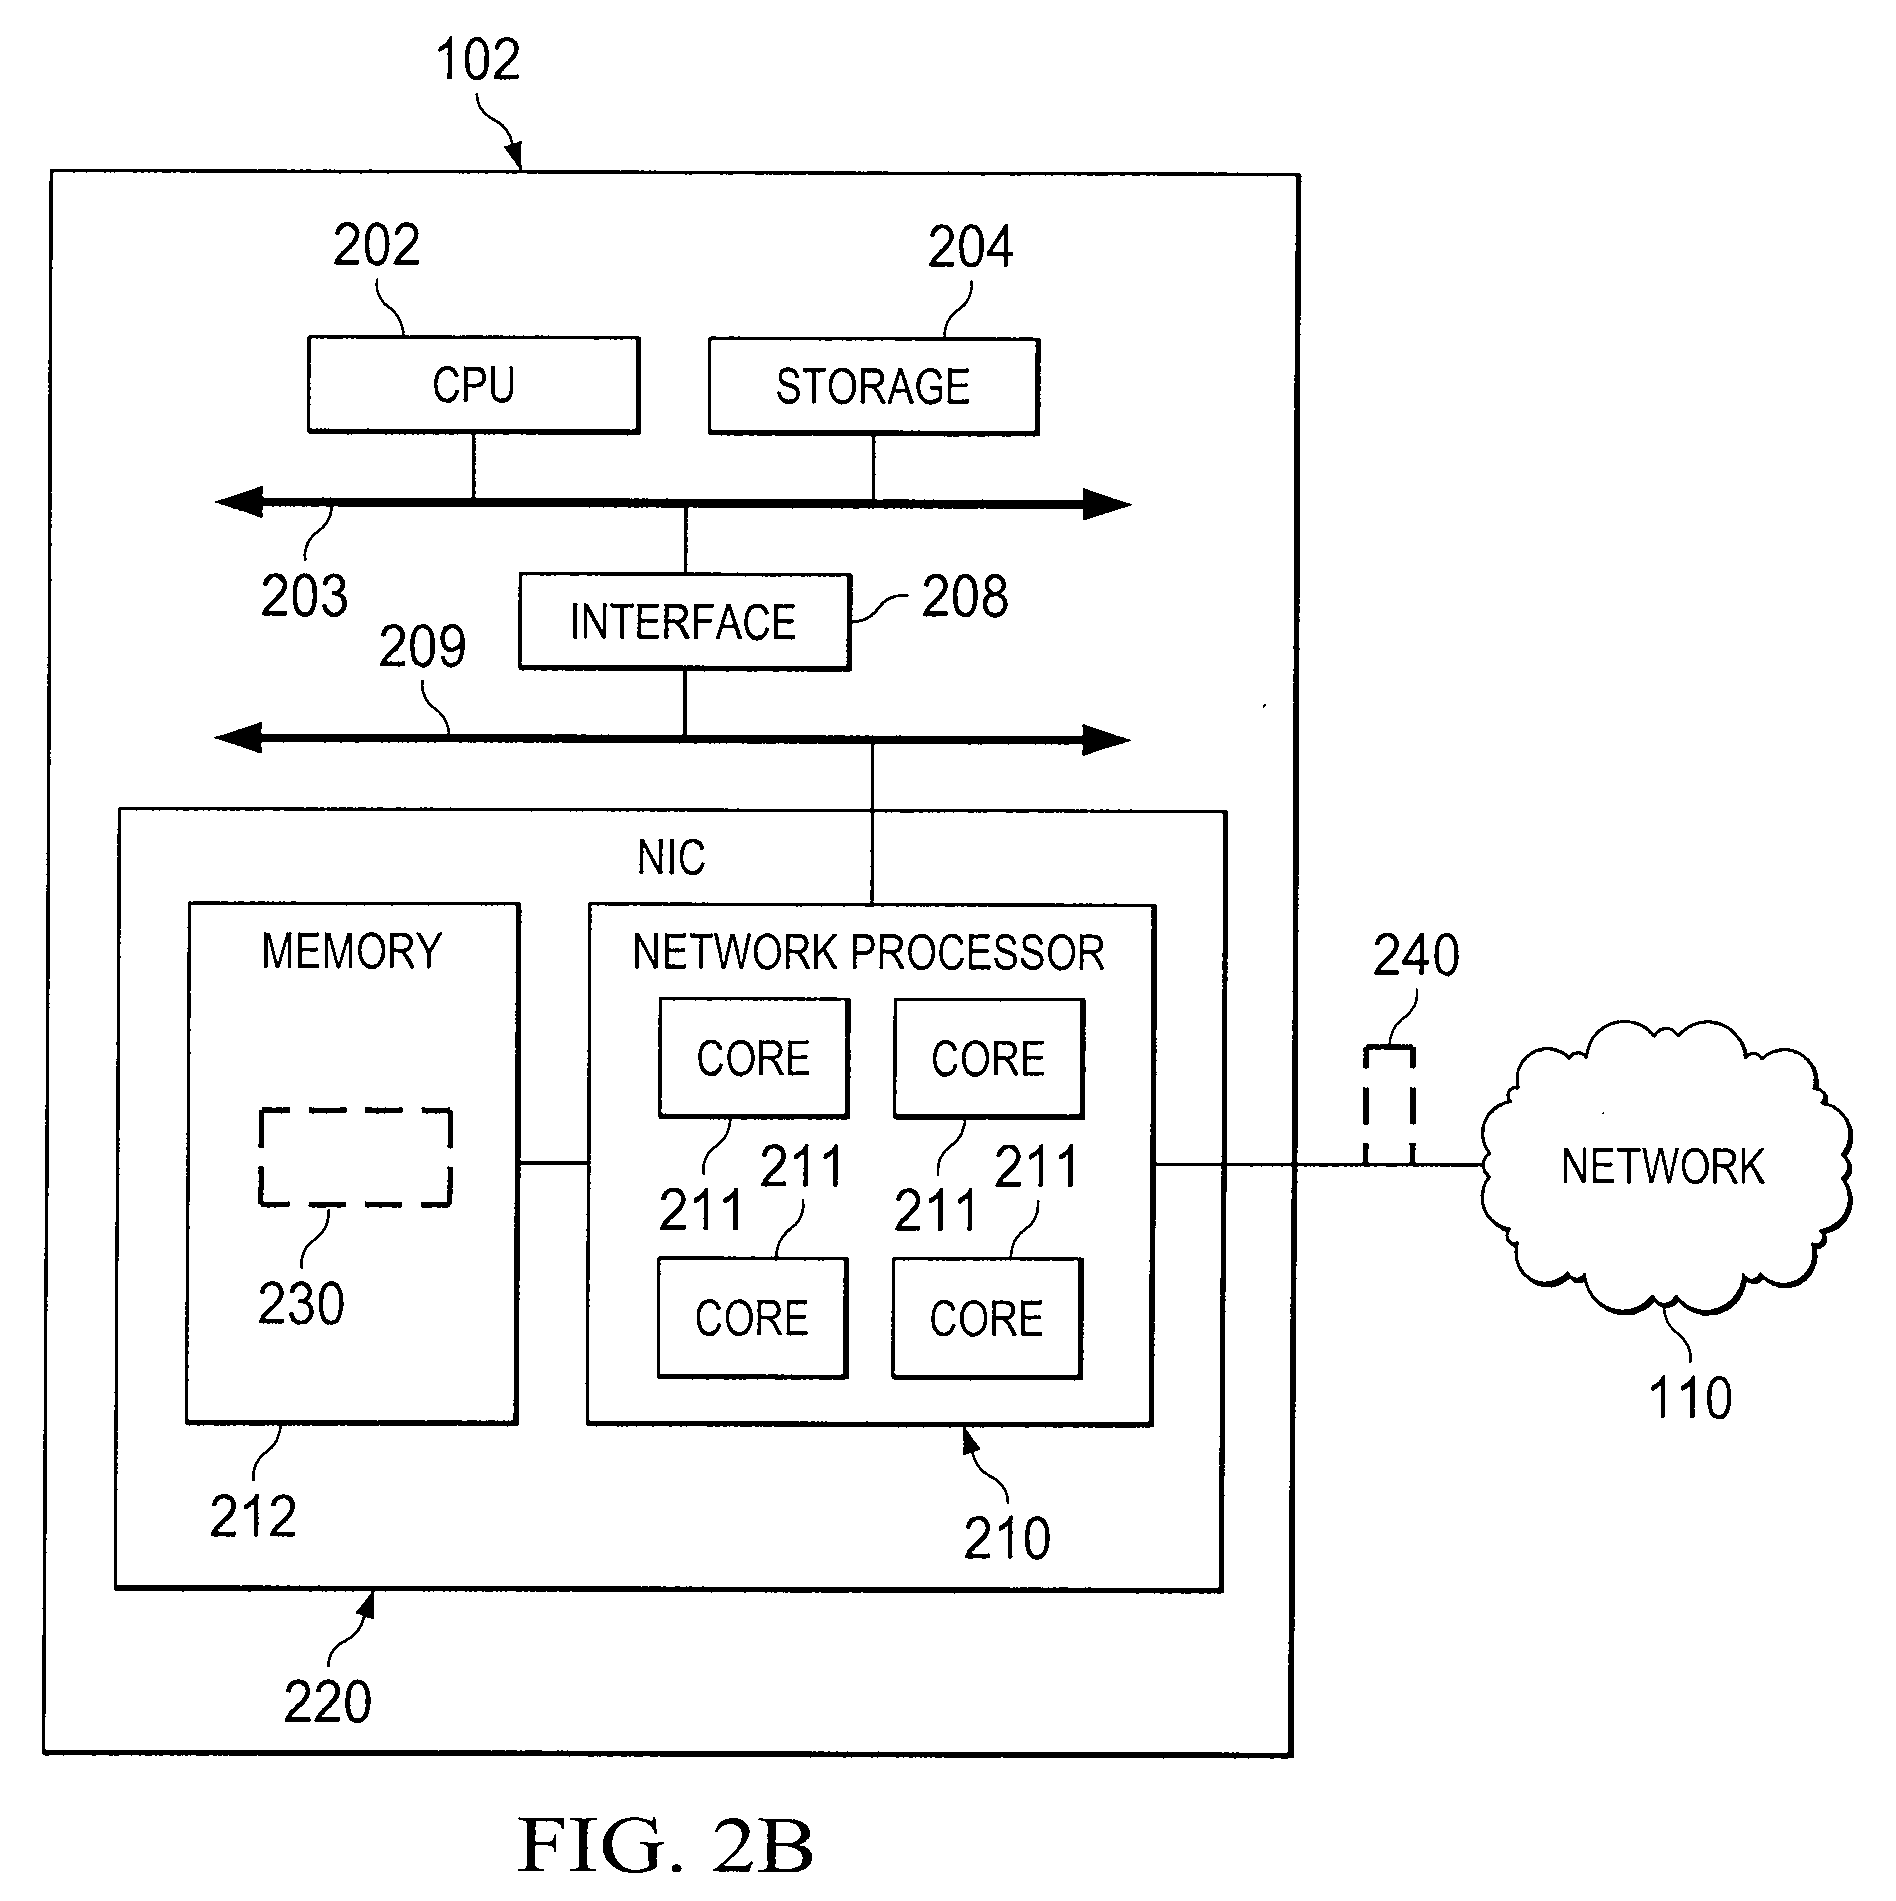 System and Method for Managing Memory in a Multiprocessor Computing Environment